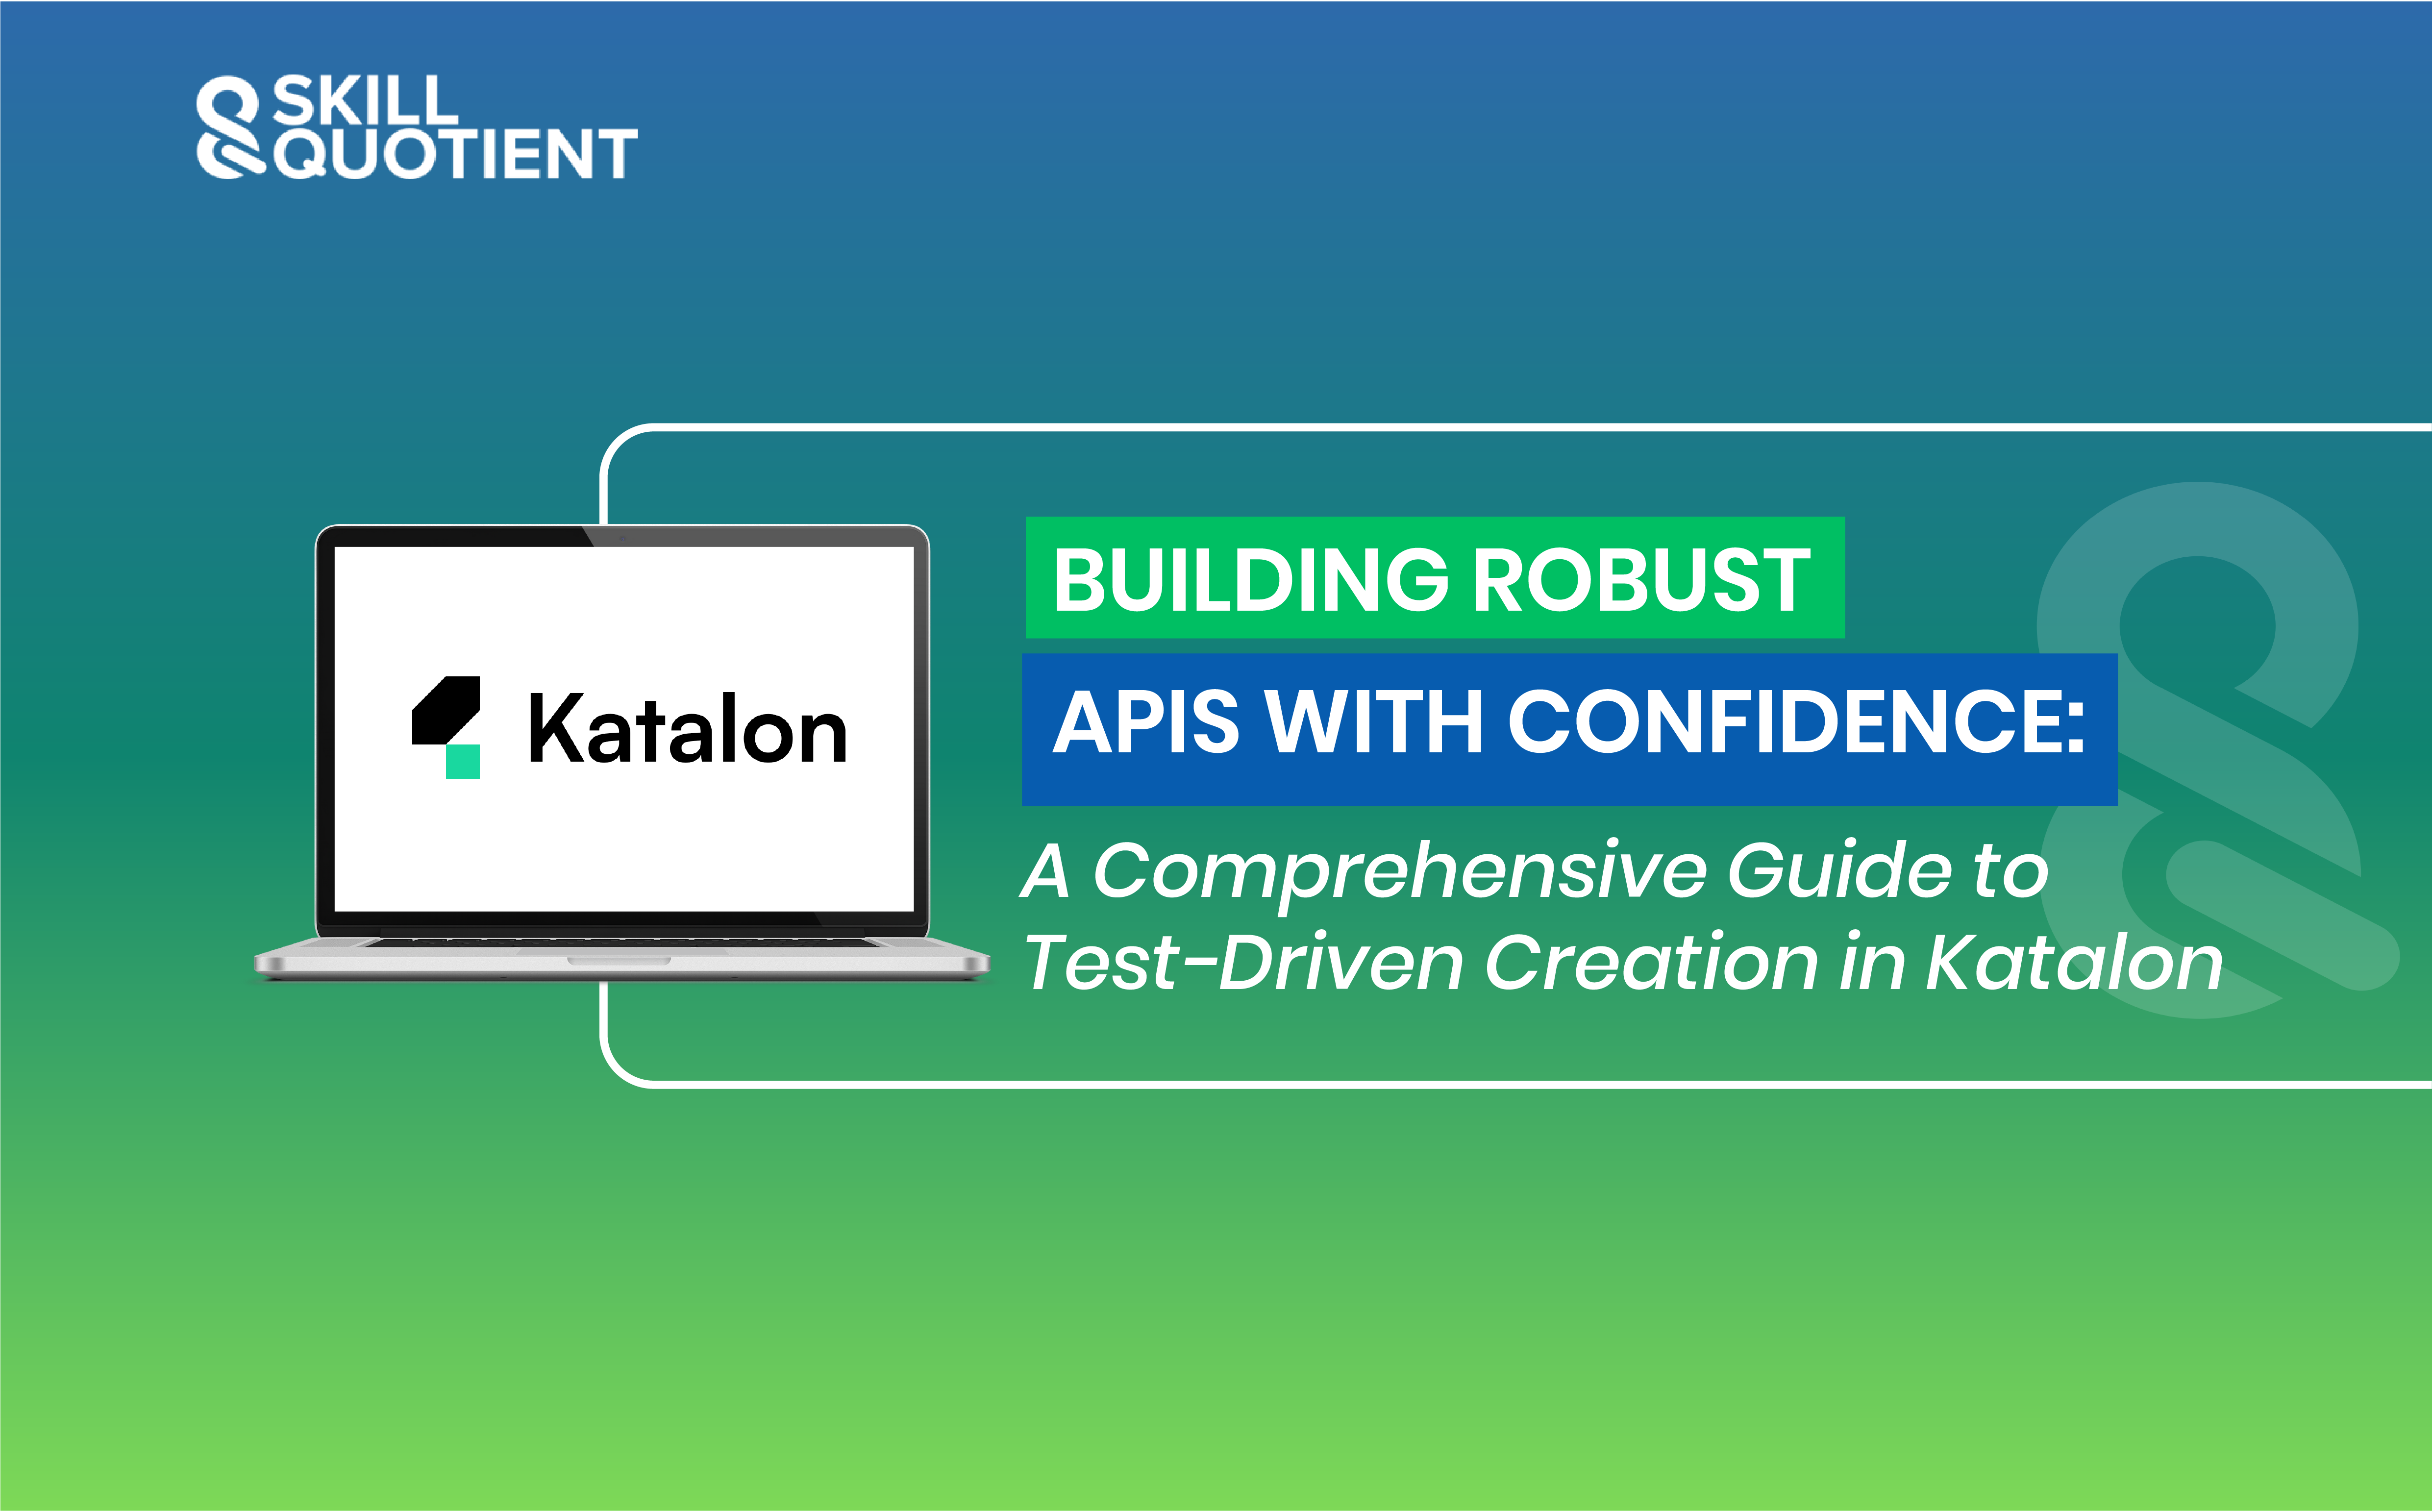 Building Robust APIs With Confidence: A Comprehensive Guide To Test-Driven Creation In Katalon